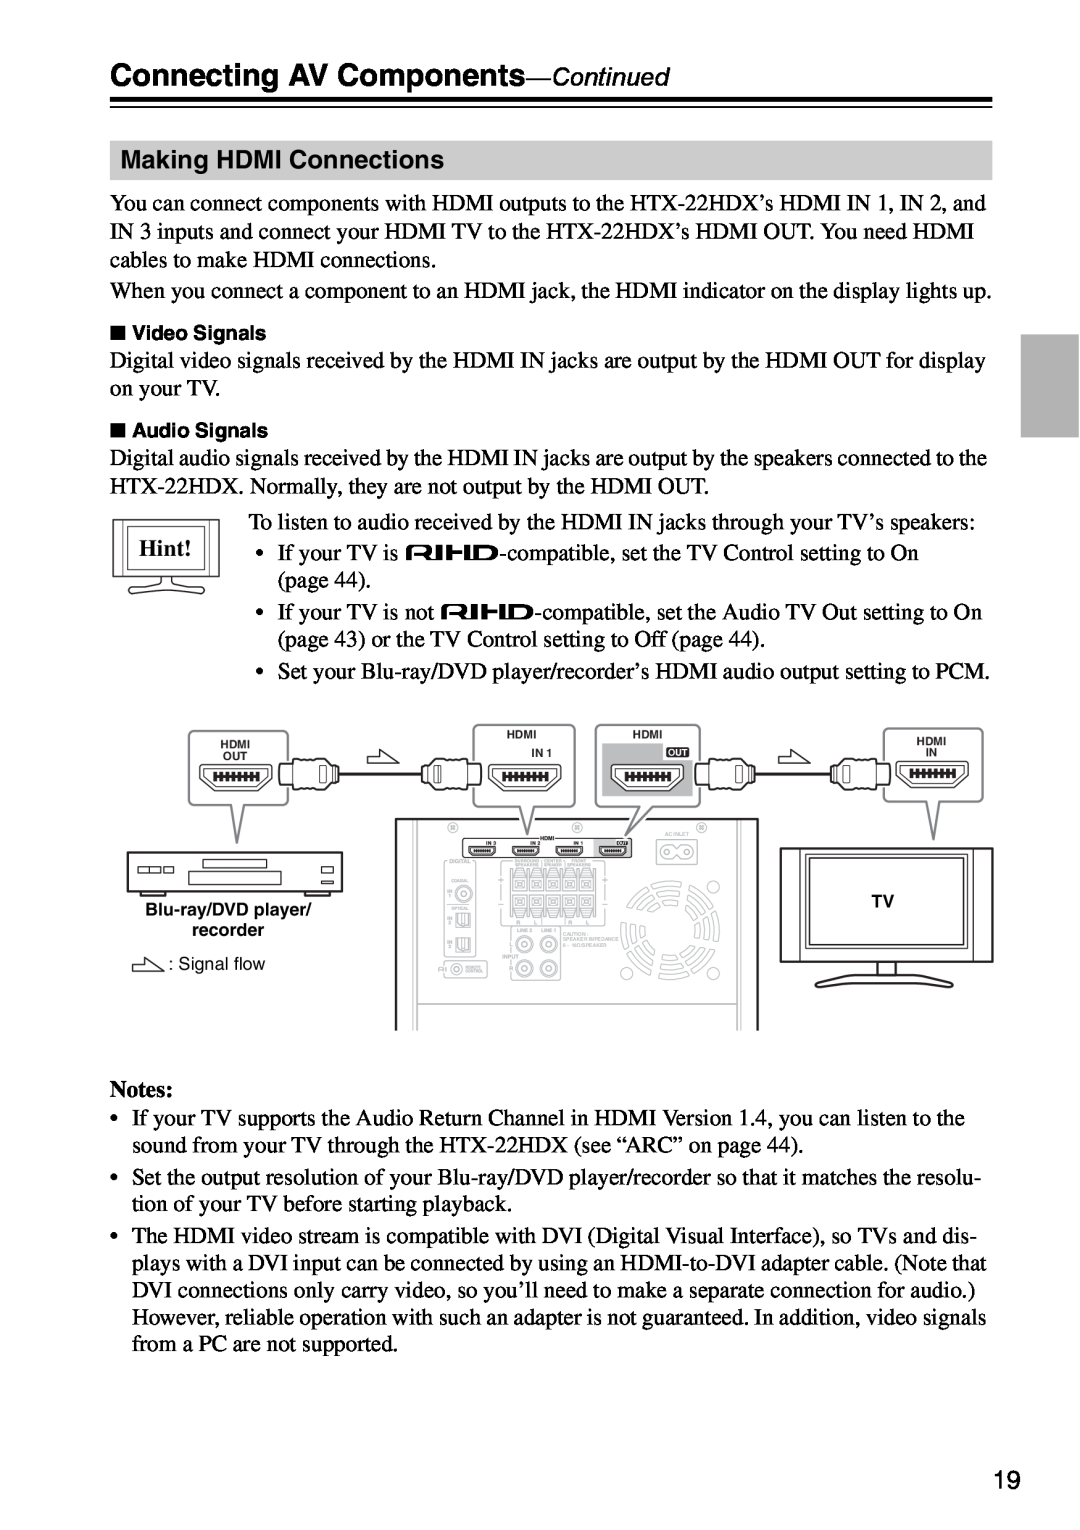 Onkyo HTX-22HDXPAW, HTX-22HDXST instruction manual Connecting AV Components-Continued, Making HDMI Connections 